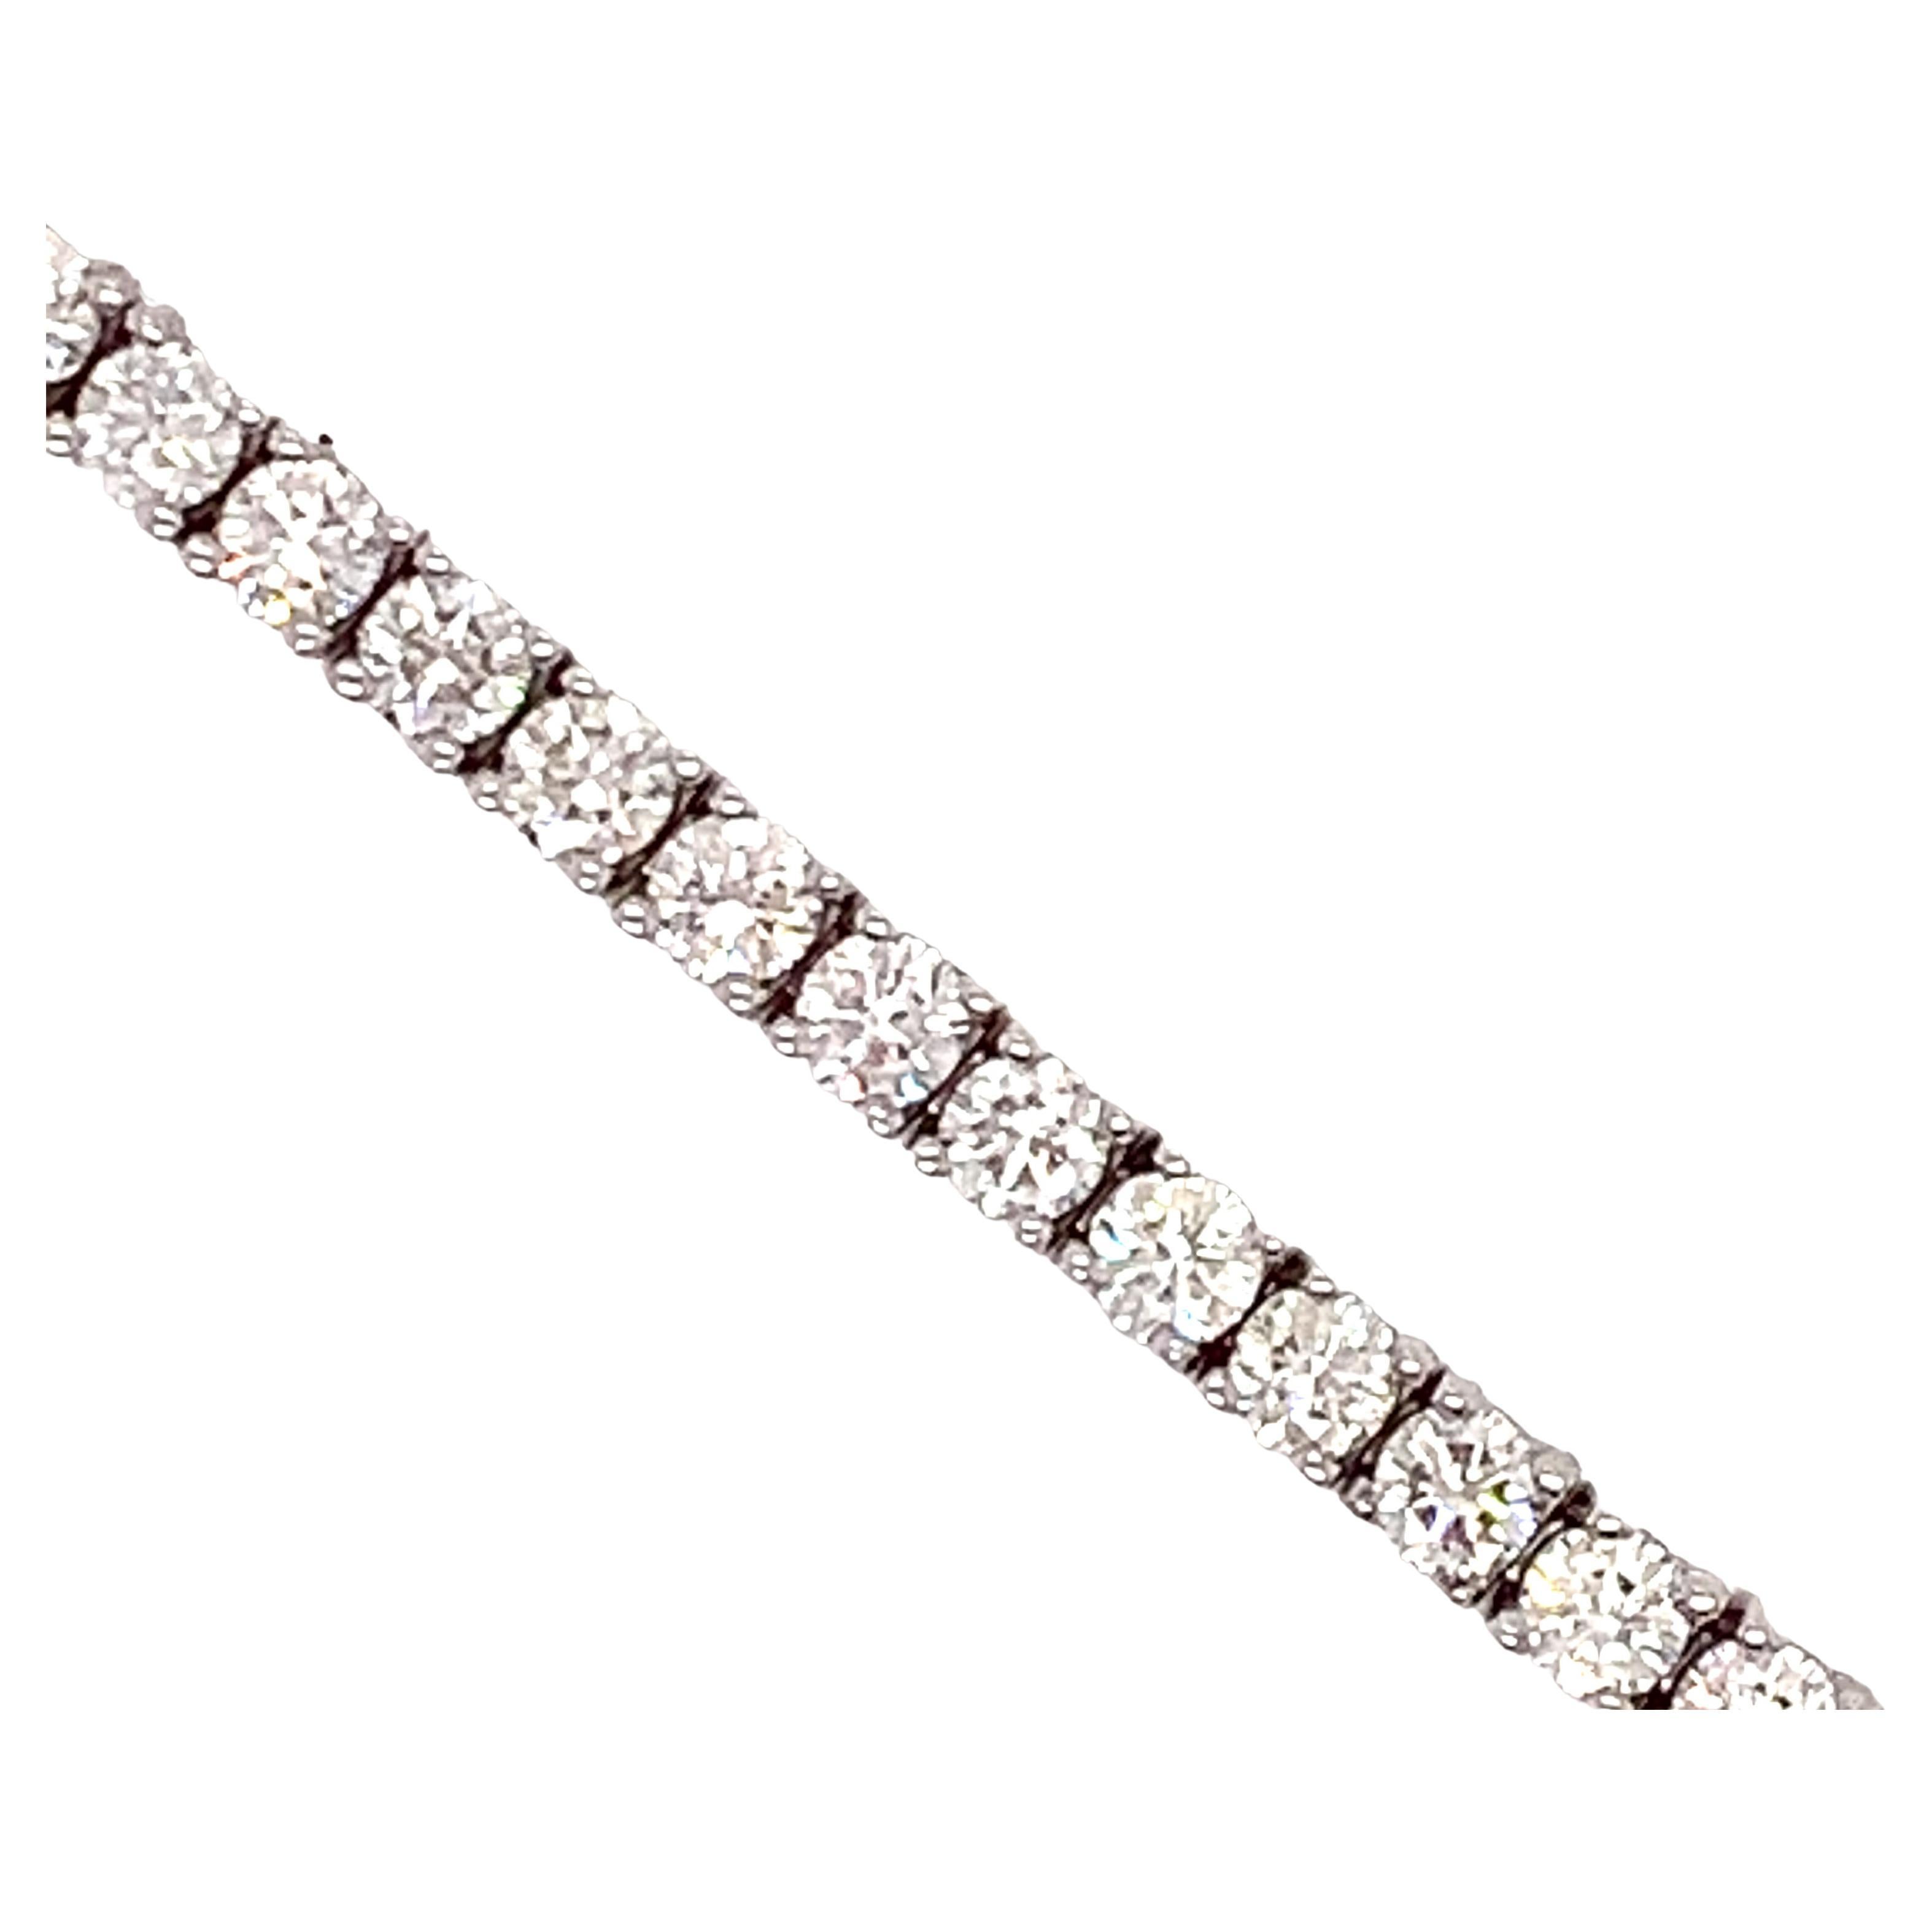 Whether it's your first diamond tennis bracelet or you collect them, this classic beauty is 3.10 cttw in round diamonds. There are fifty four diamonds. These are SI clarity with a G-H color. The diamonds are mounted in 8.24 grams of 14 kt white gold